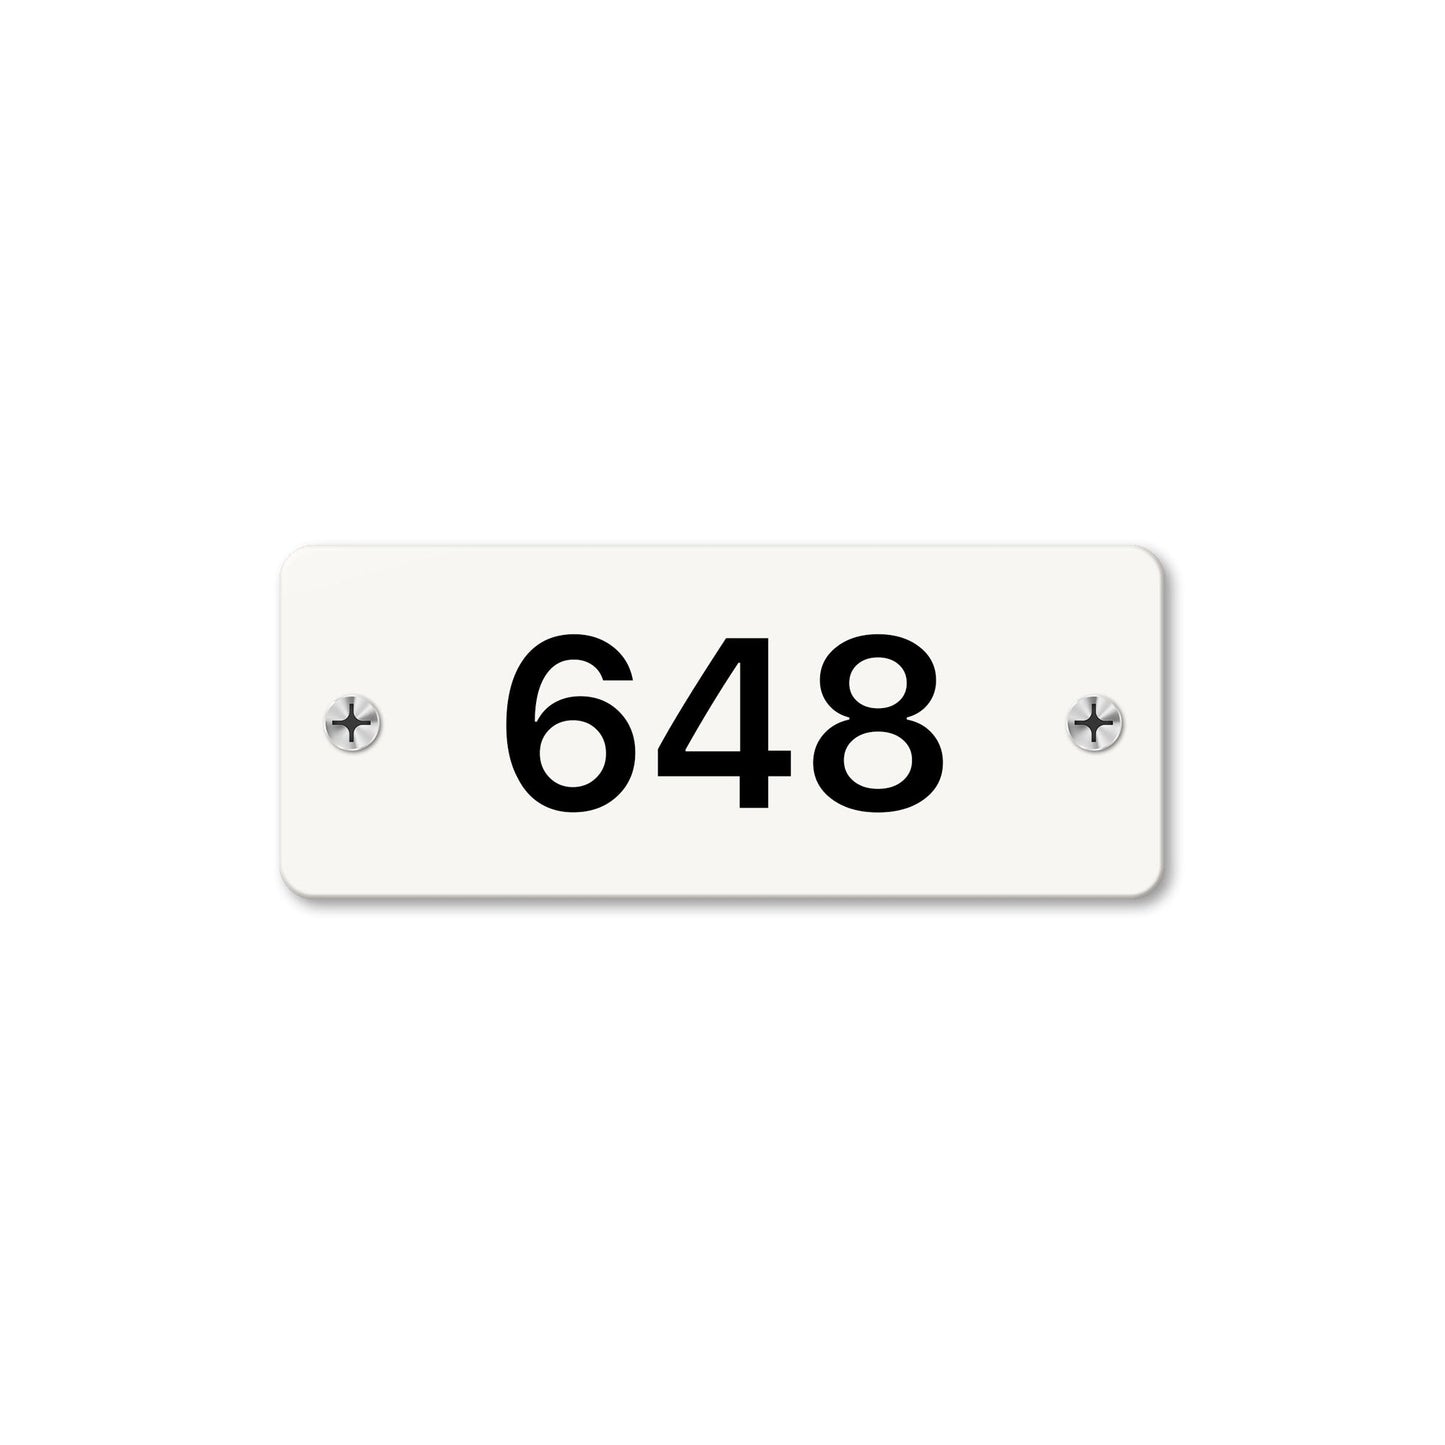 Numeral 648